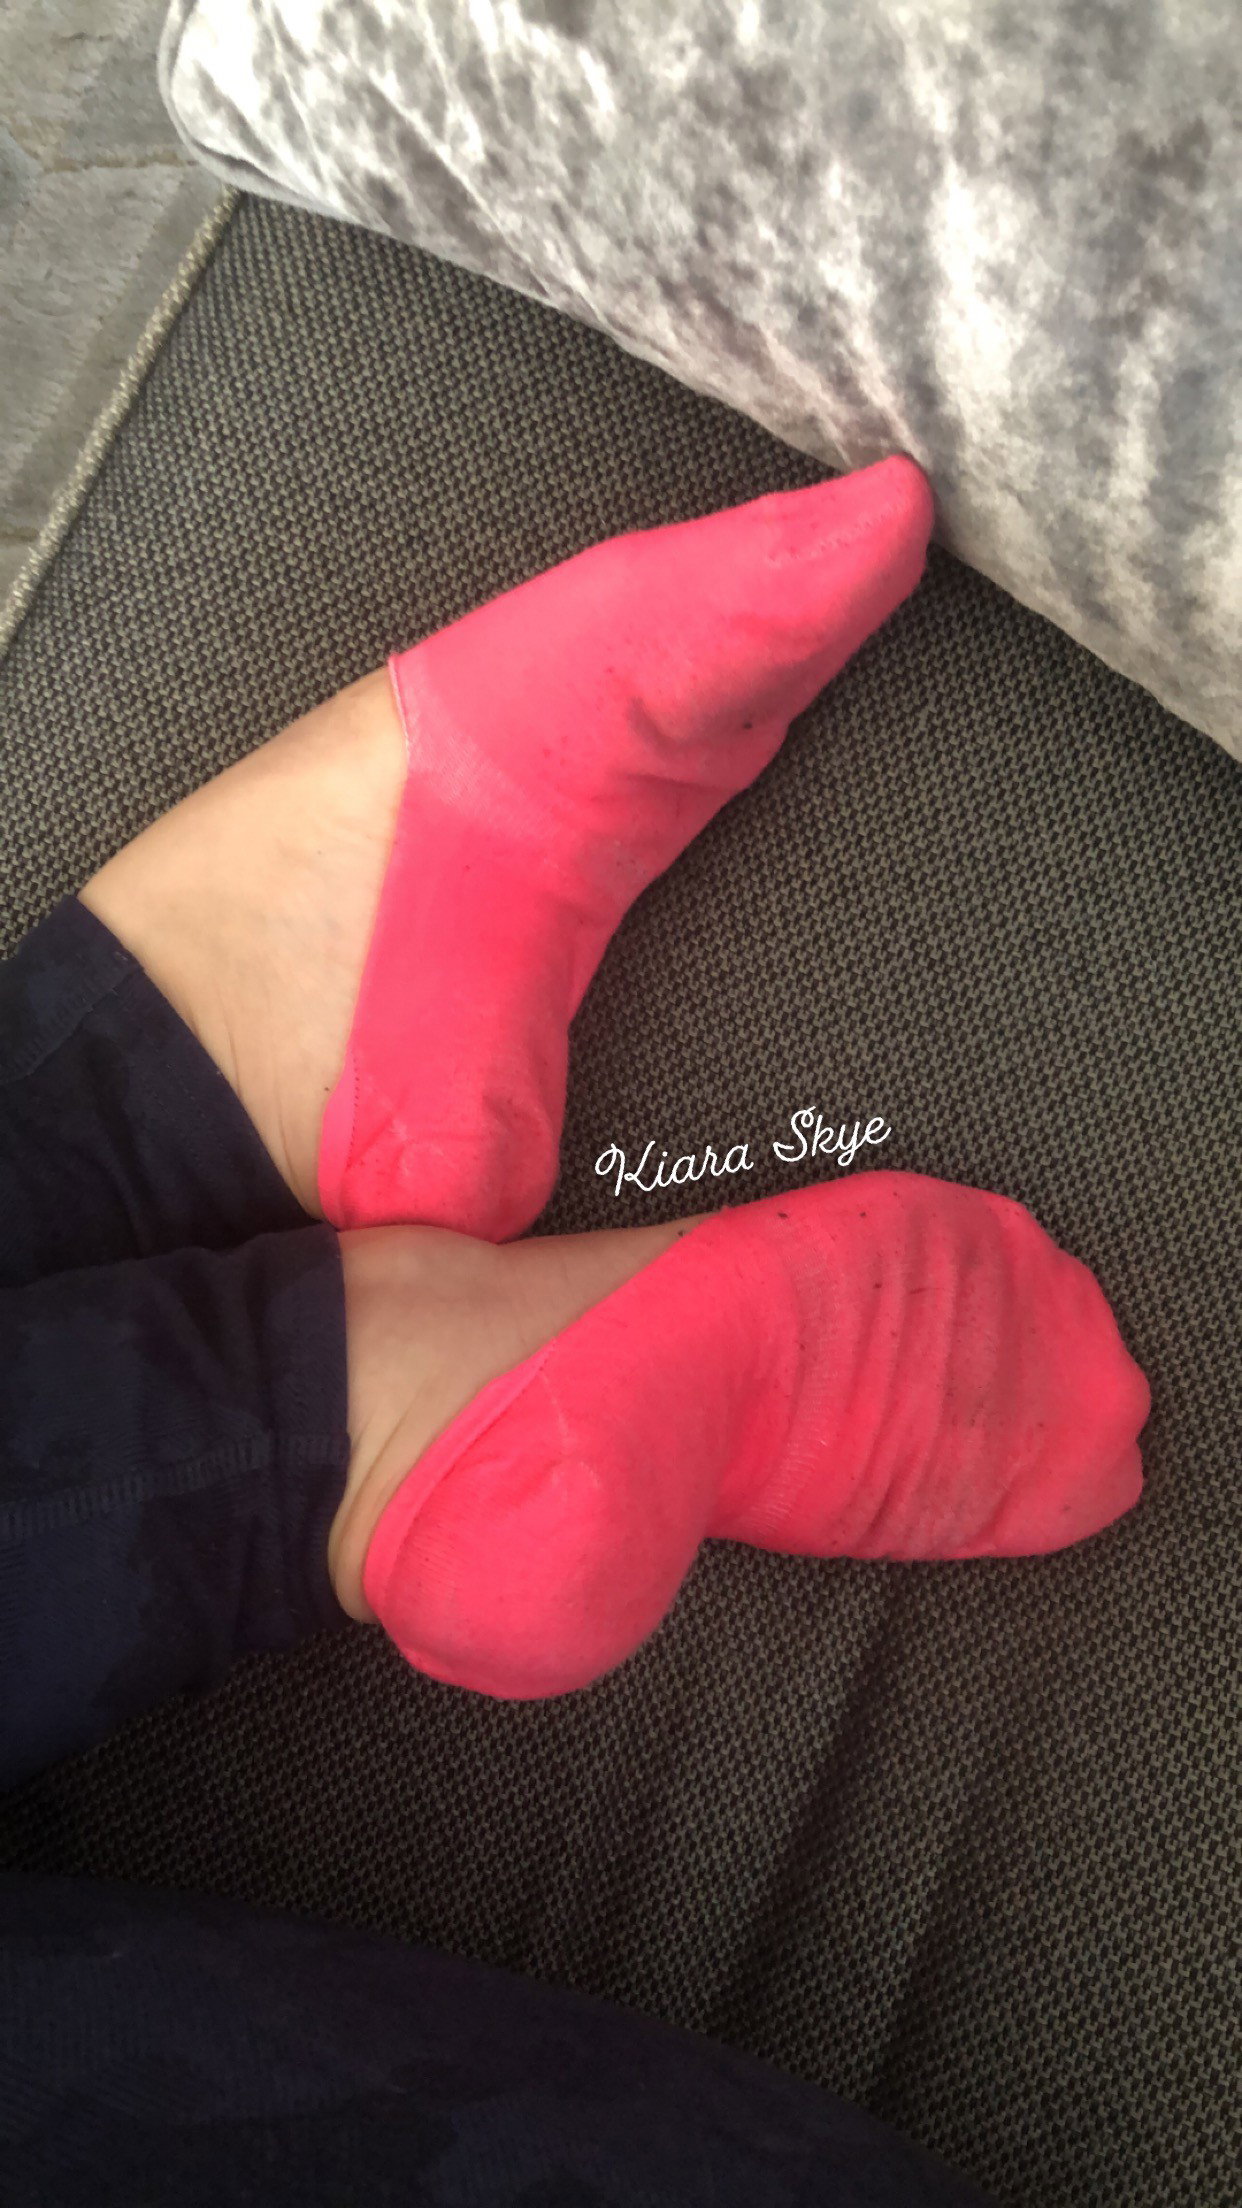 Watch the Photo by Kiara Skye with the username @KiaraSkye, who is a star user, posted on May 3, 2020. The post is about the topic Hot Girls in Socks. and the text says '🧦These sweaty, smelly #socks could be yours! 

Get them here- http://www.ebanned.net/cgi-bin/auction/auction.cgi?category=wclothing23&item=1588890311


#smellysocks #sweatyfeet #stinkyfeet #smellyfeet #wornitems #forsale #wornsocks #footfetish..'